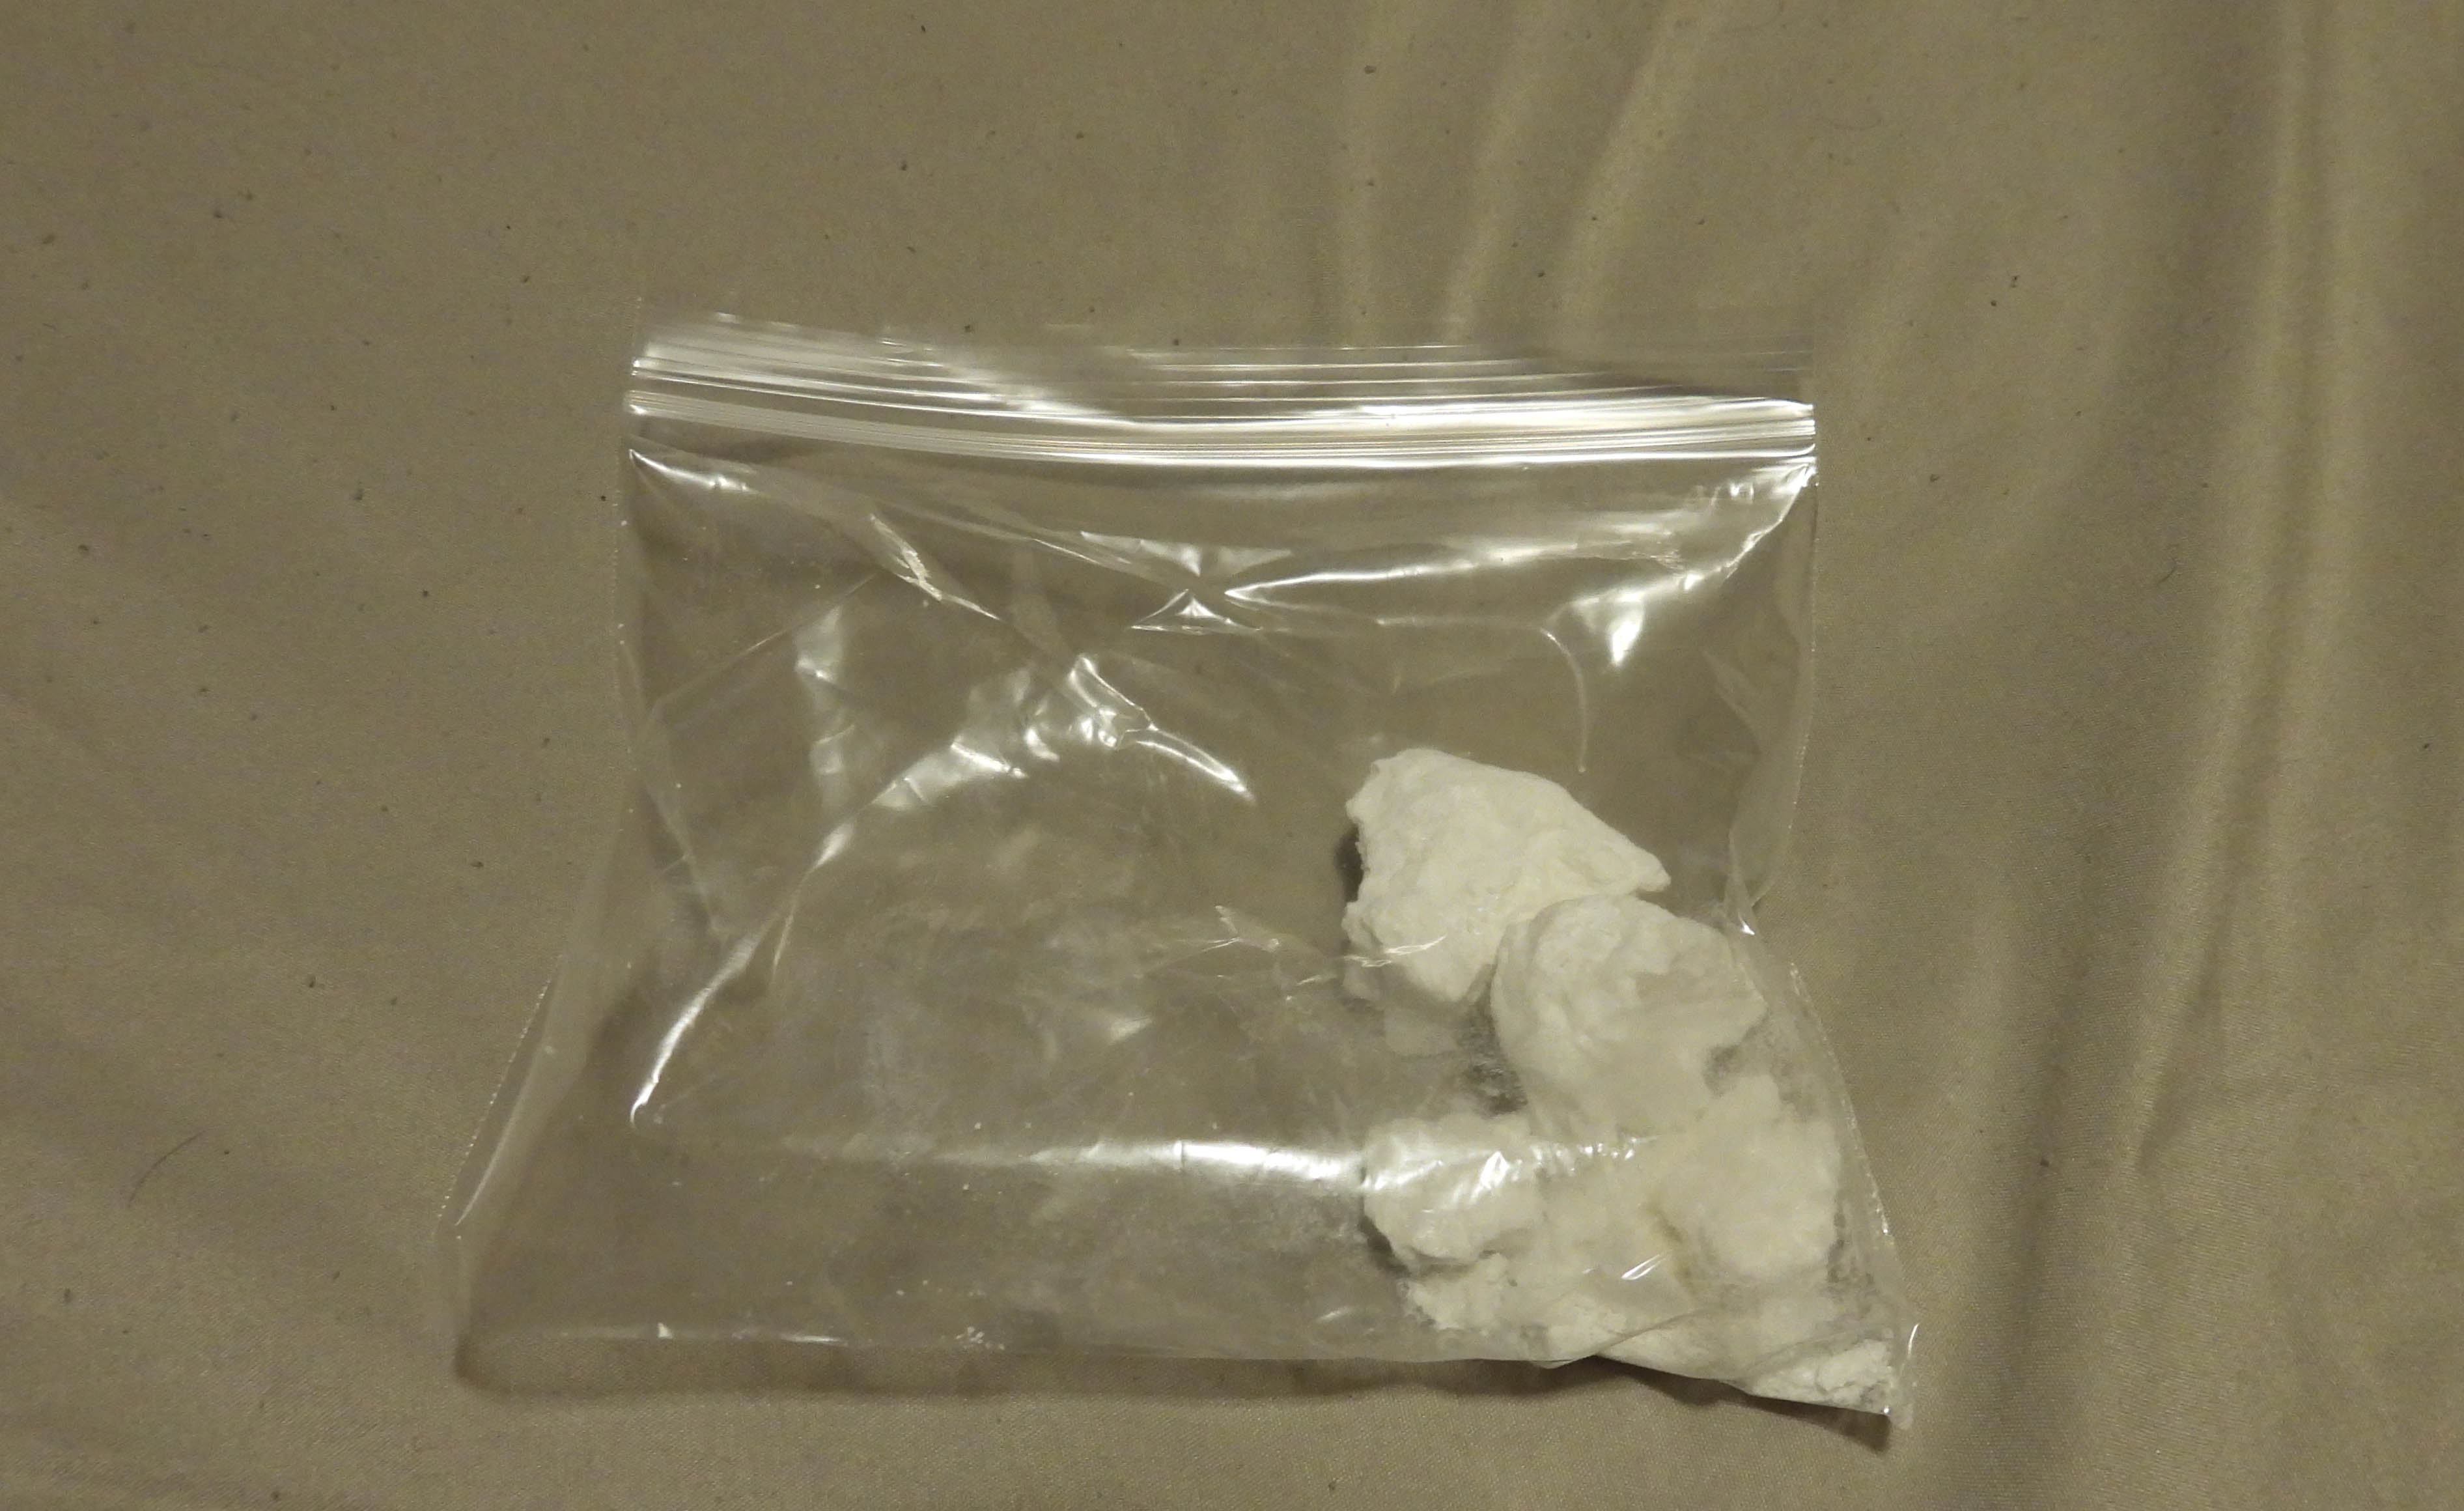 Southern Ontario man arrested, charged with trafficking cocaine